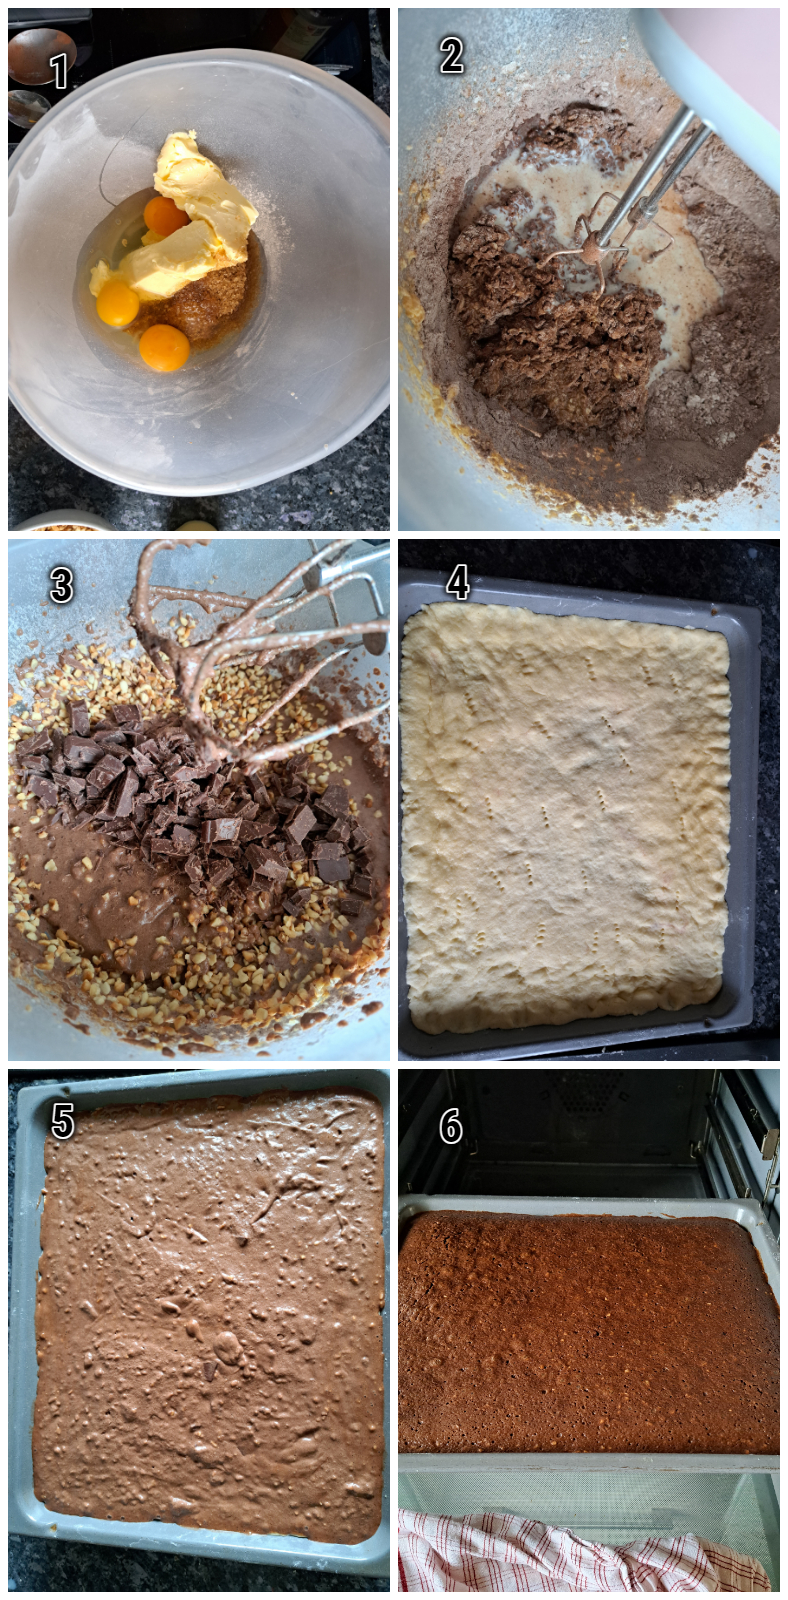 A comprehensive collage depicting the steps to make the chocolate filling batter for German chocolate spice cake with nuts and spreading it onto a prebaked shortbread crust, and baking it to perfection.